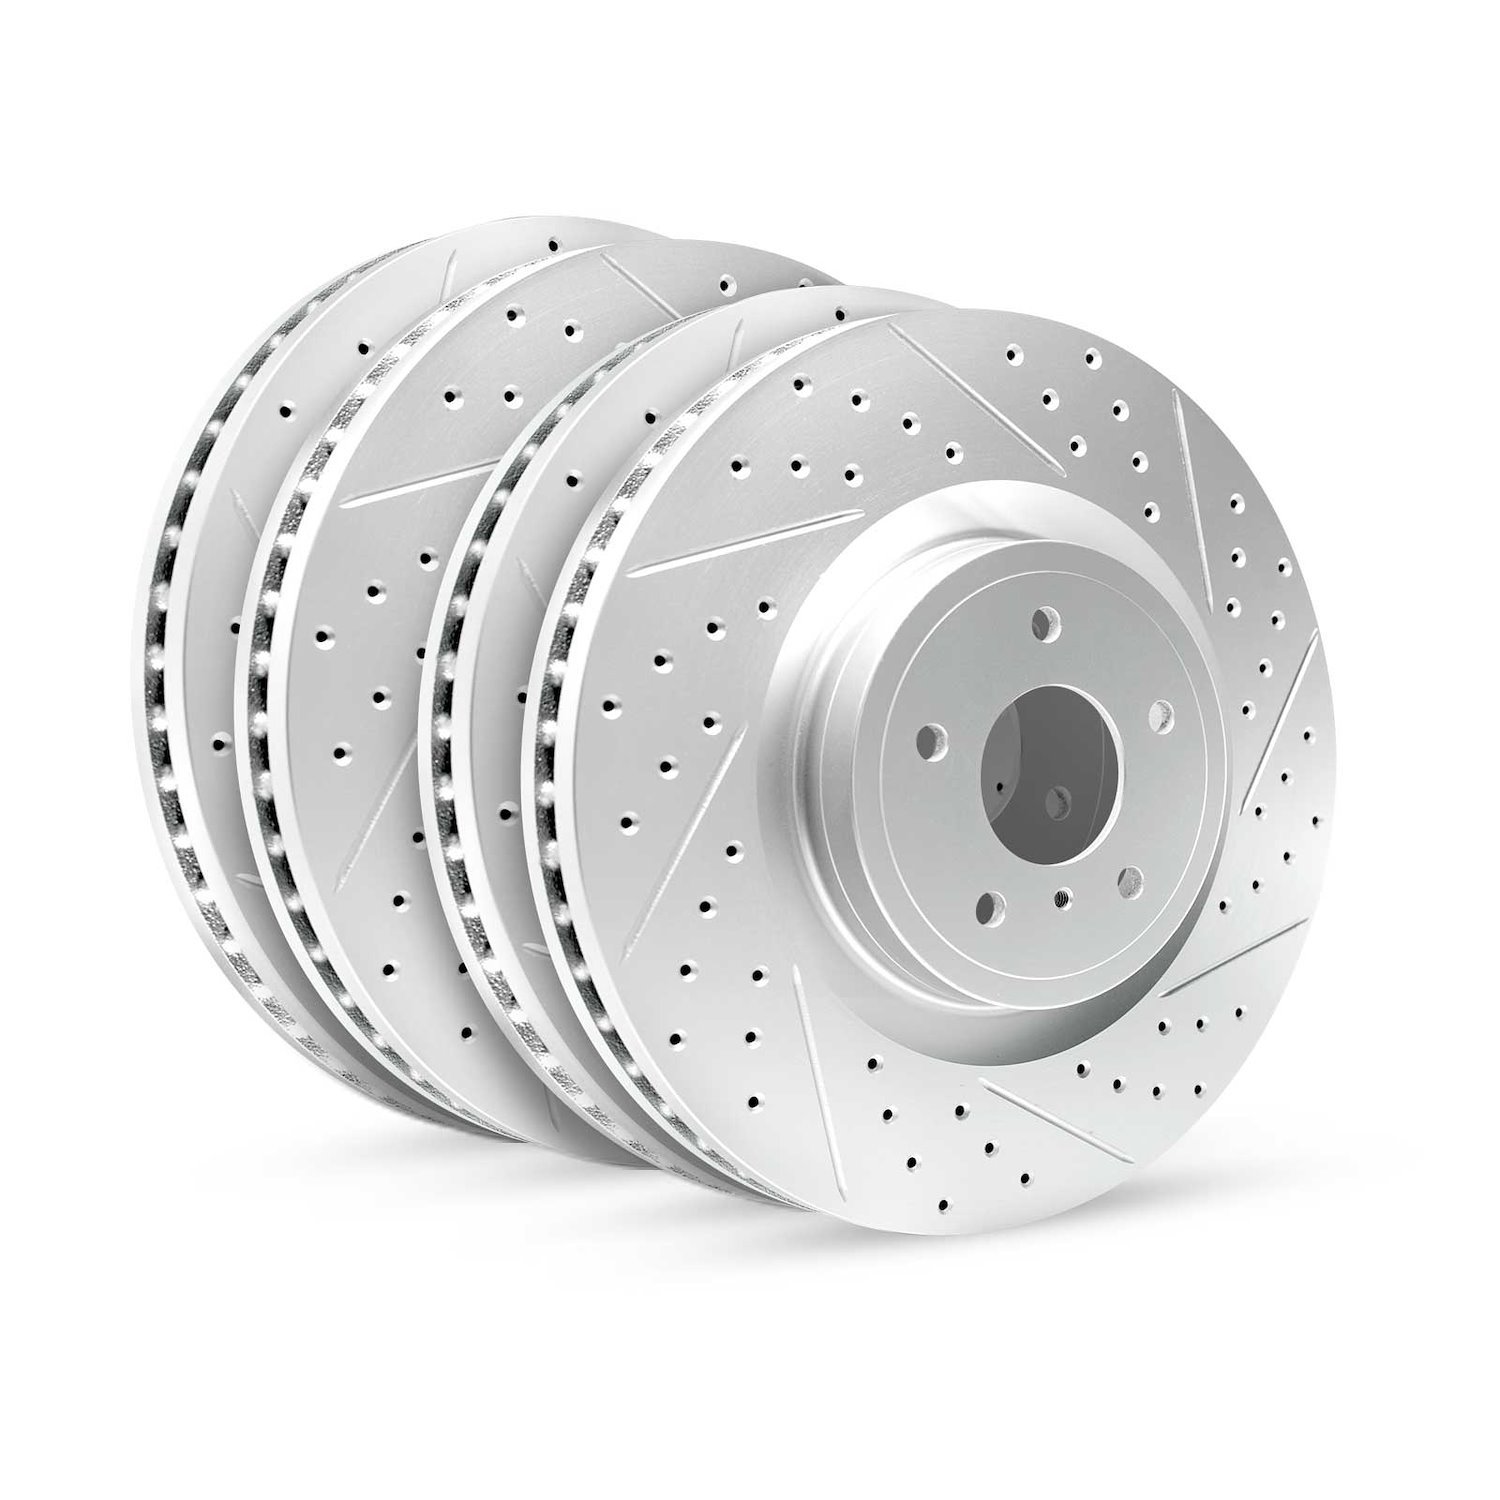 GEO-Carbon Drilled/Slotted Rotors, 2014-2015 BMW, Position: